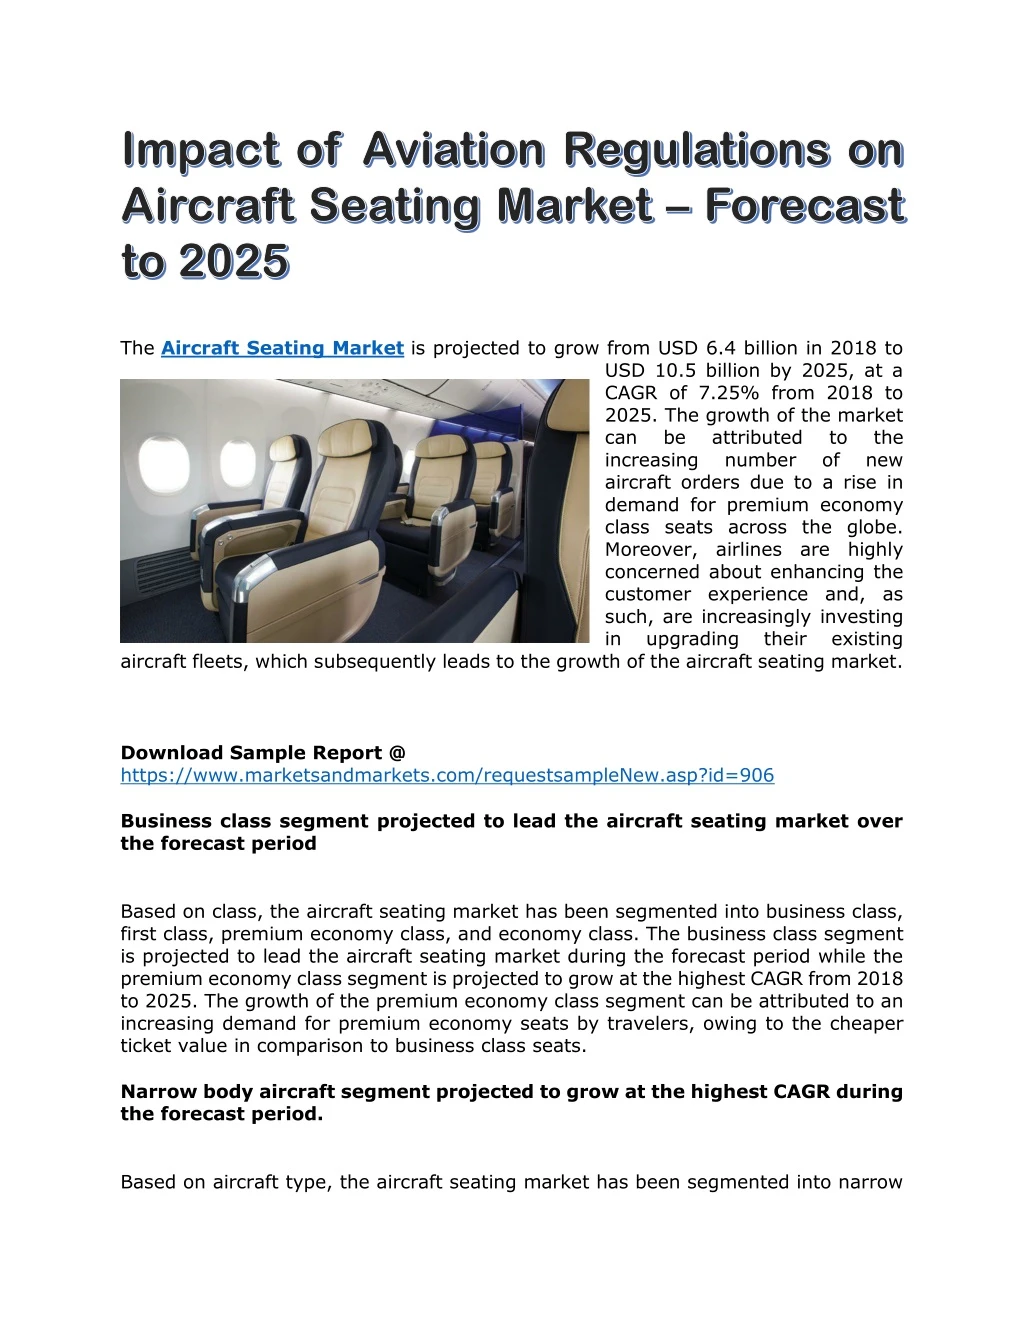 the aircraft seating market is projected to grow